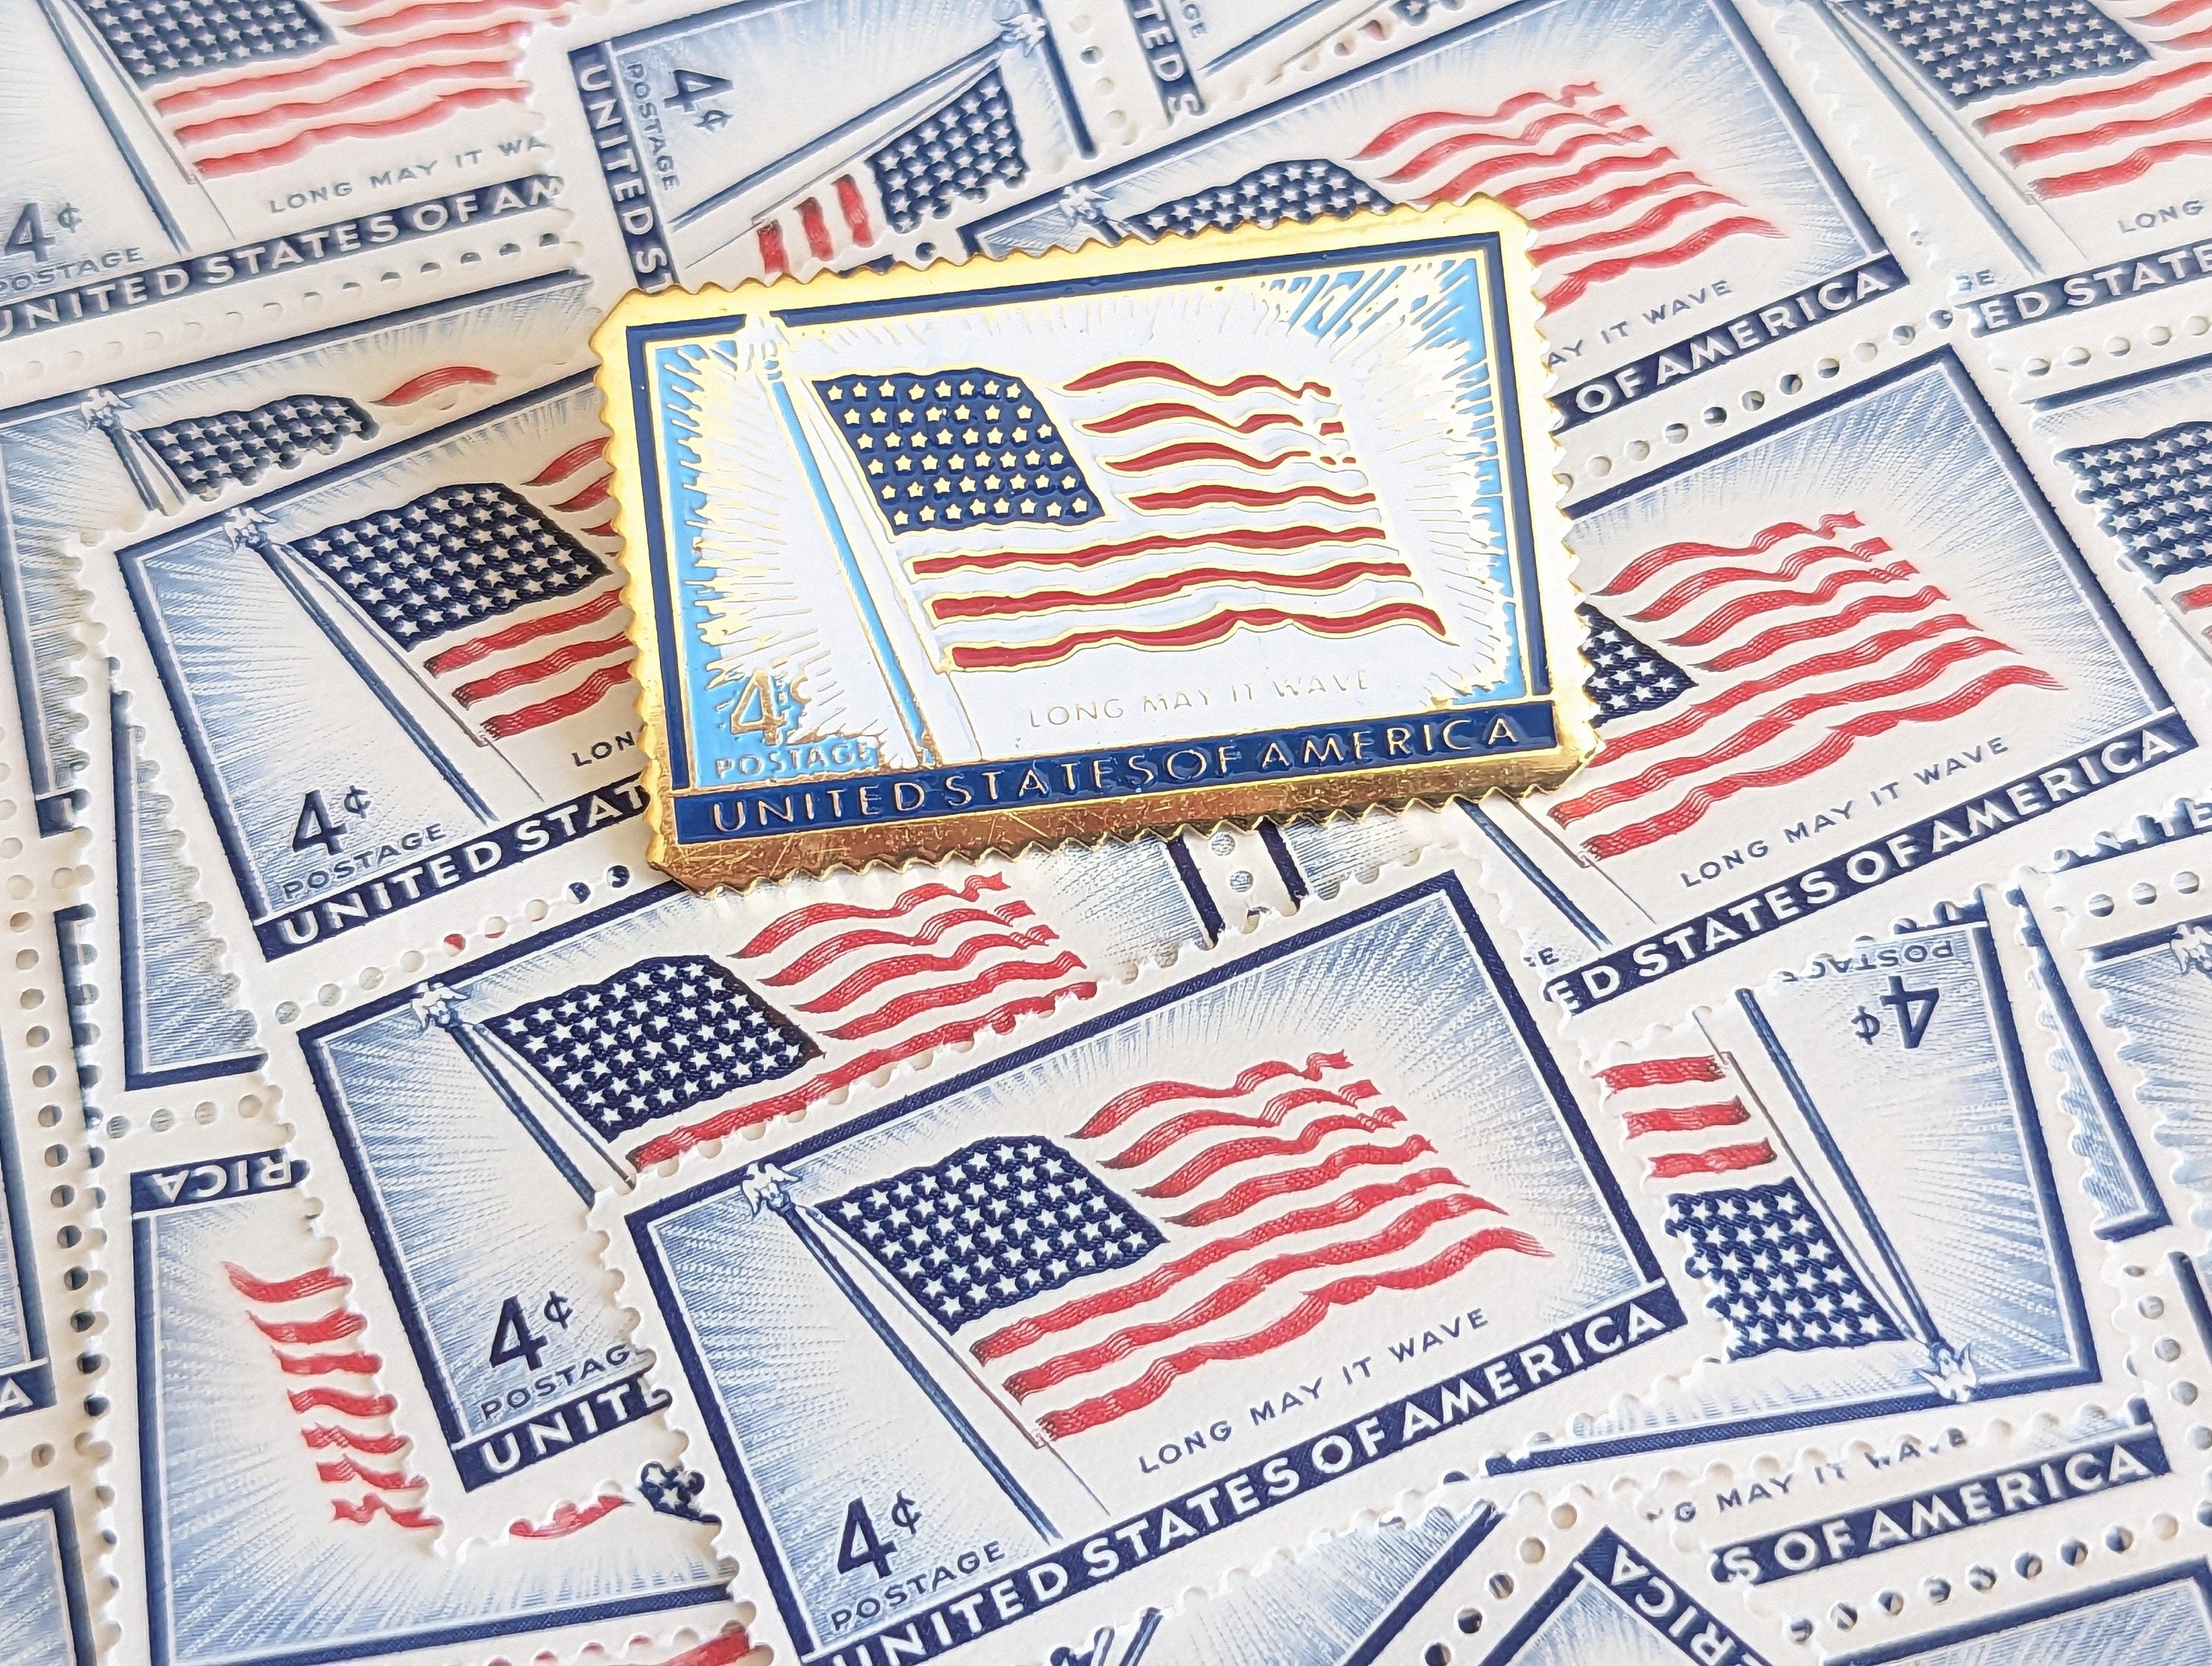 FOREVER US FLAG 2018 STAMPS FIRST CLASS MAIL POSTAGE STAMP ROLL OF 100  AUTHENTIC 100%